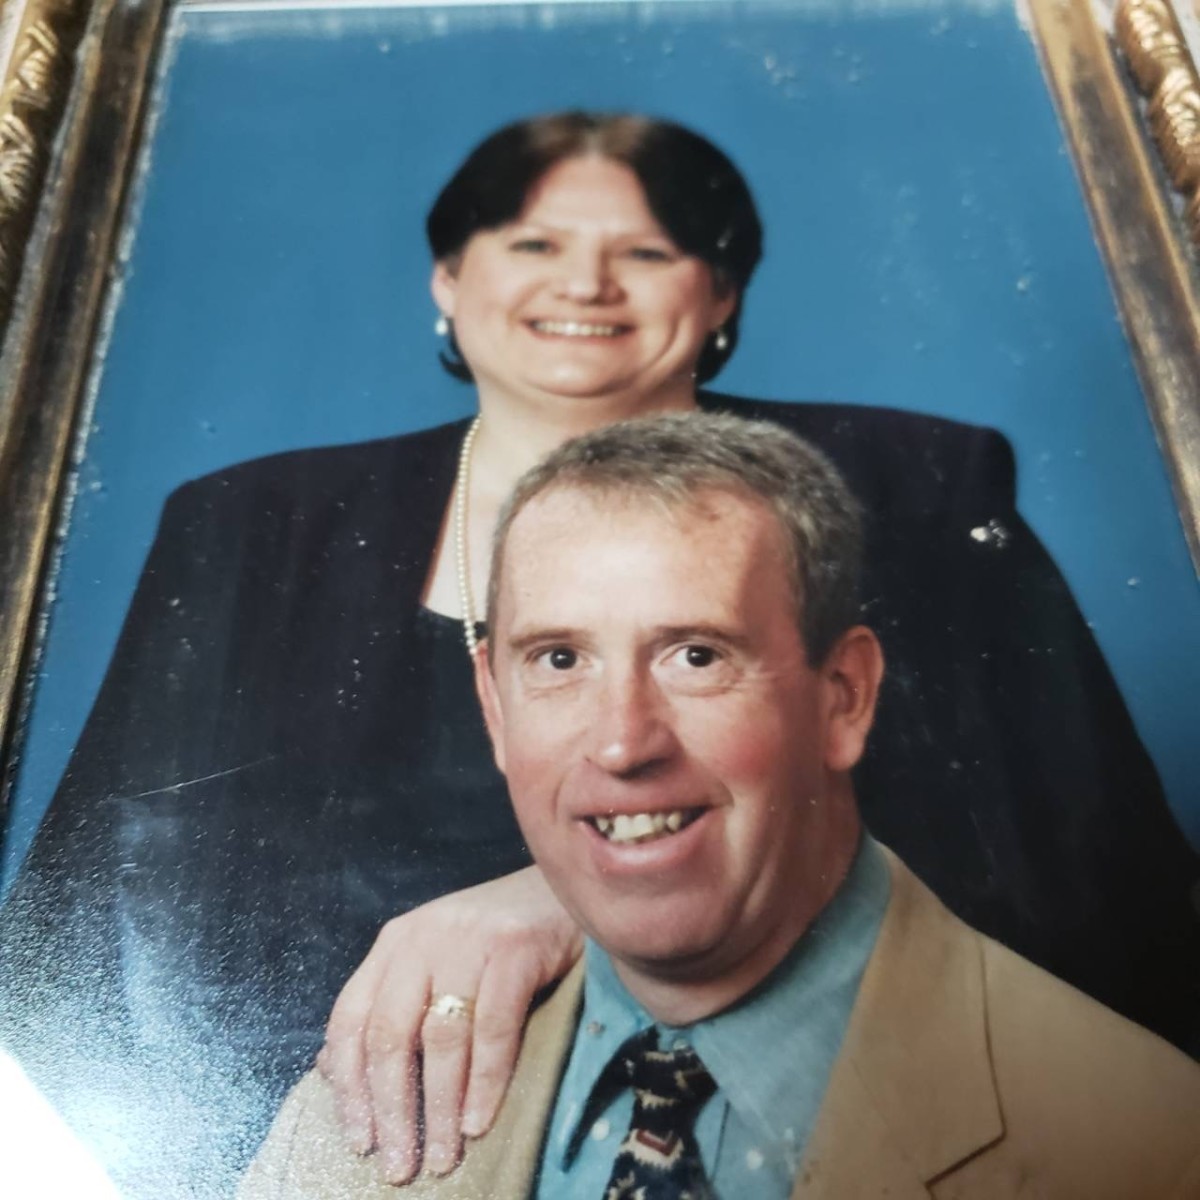 John Ackley and my sister Connie; picture was taken in 2002.